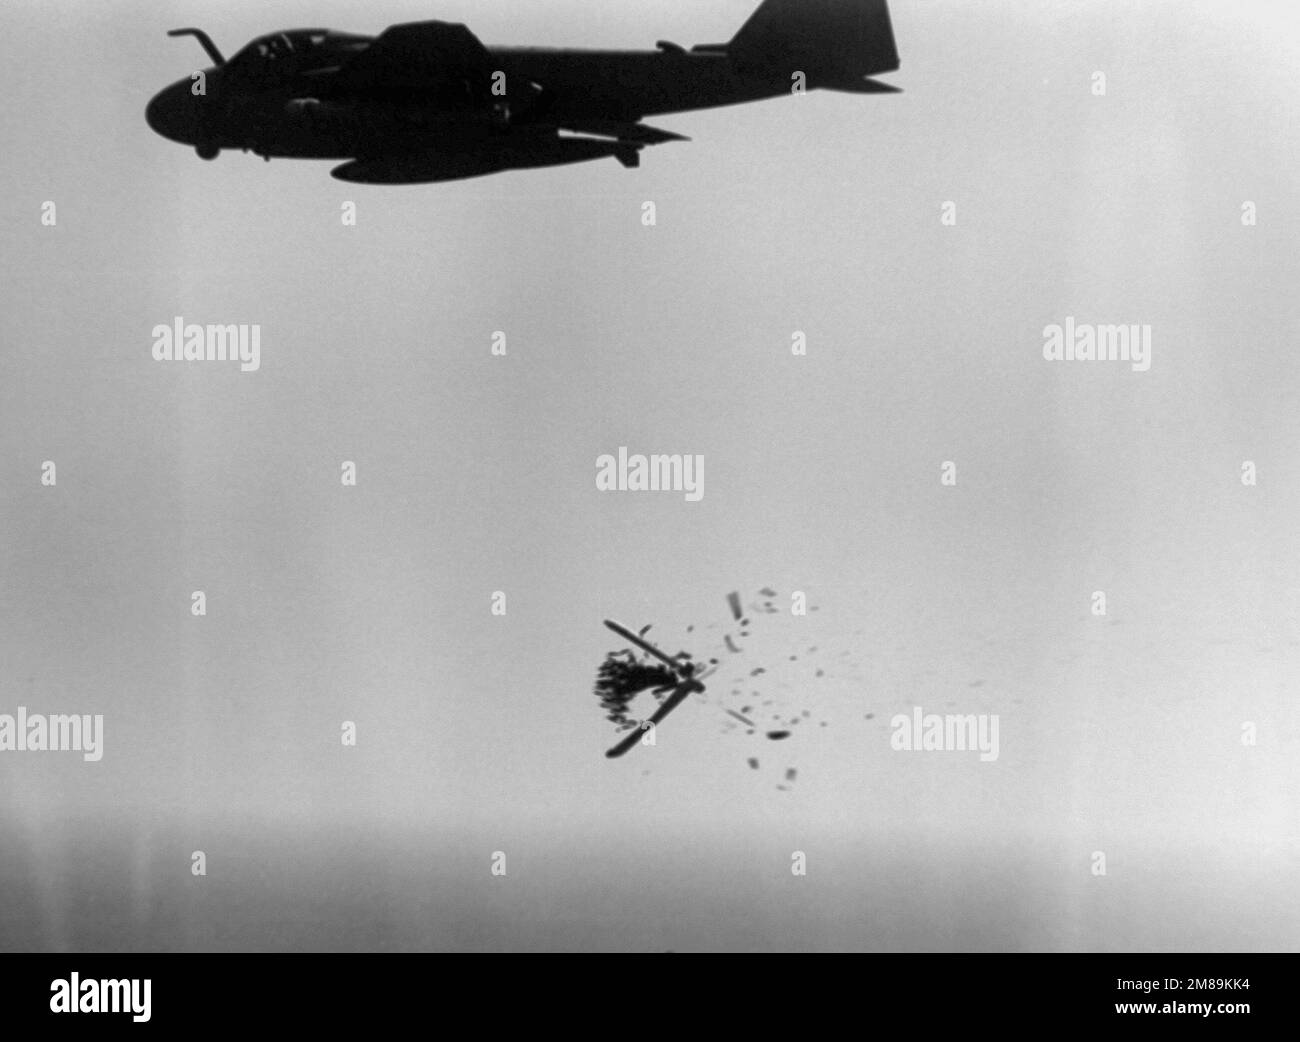 A CBU-59 cluster bomb splits open to release its bomblets after being dropped from an A-6E Intruder aircraft during an attack on an Iranian target. The attack is in retaliation for the mining of the guided missile frigate USS SAMUEL B. ROBERTS (FFG-58). Country: Unknown Stock Photo